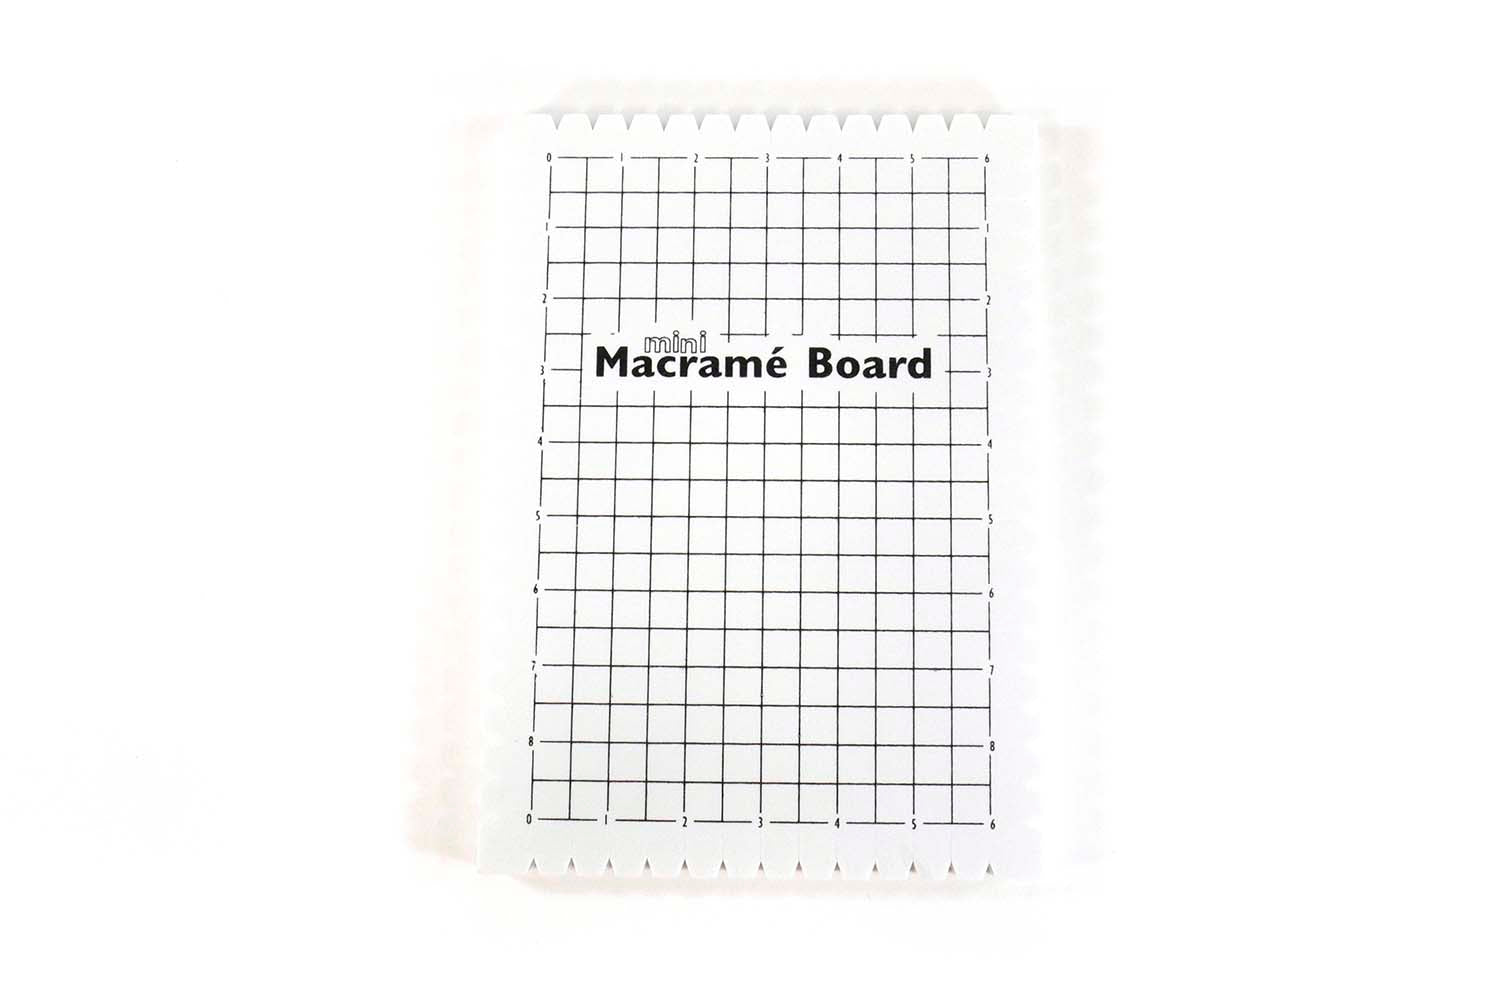 Portable The Macrame Board Craft with Grids Wood Macrame Project Board